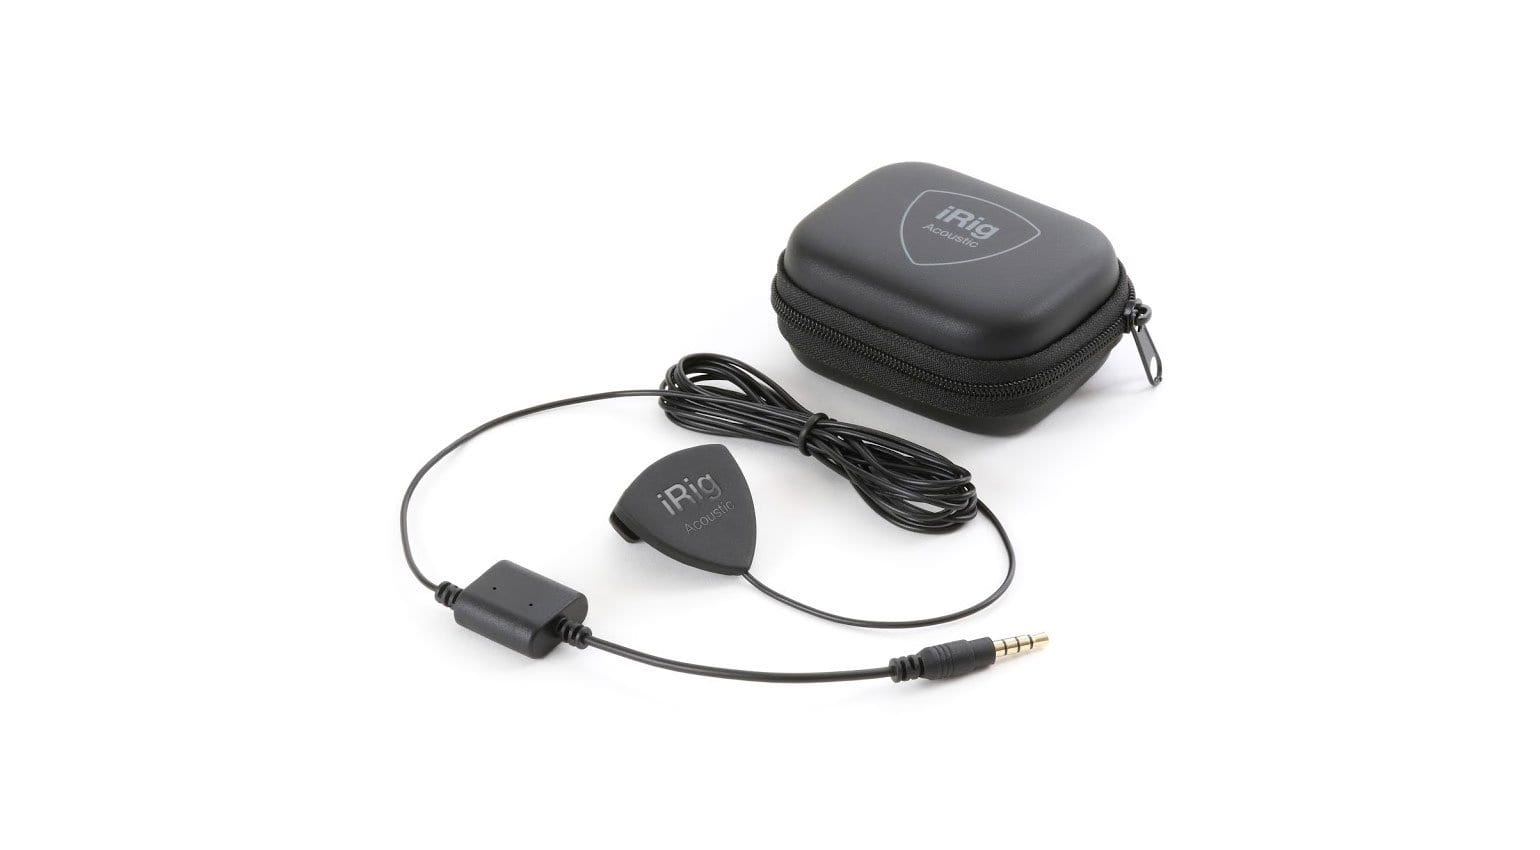 Ik Multimedia S Irig Acoustic Pickup Is Insanely Small And Works With Your Phone Or Tablet Gearnews Com